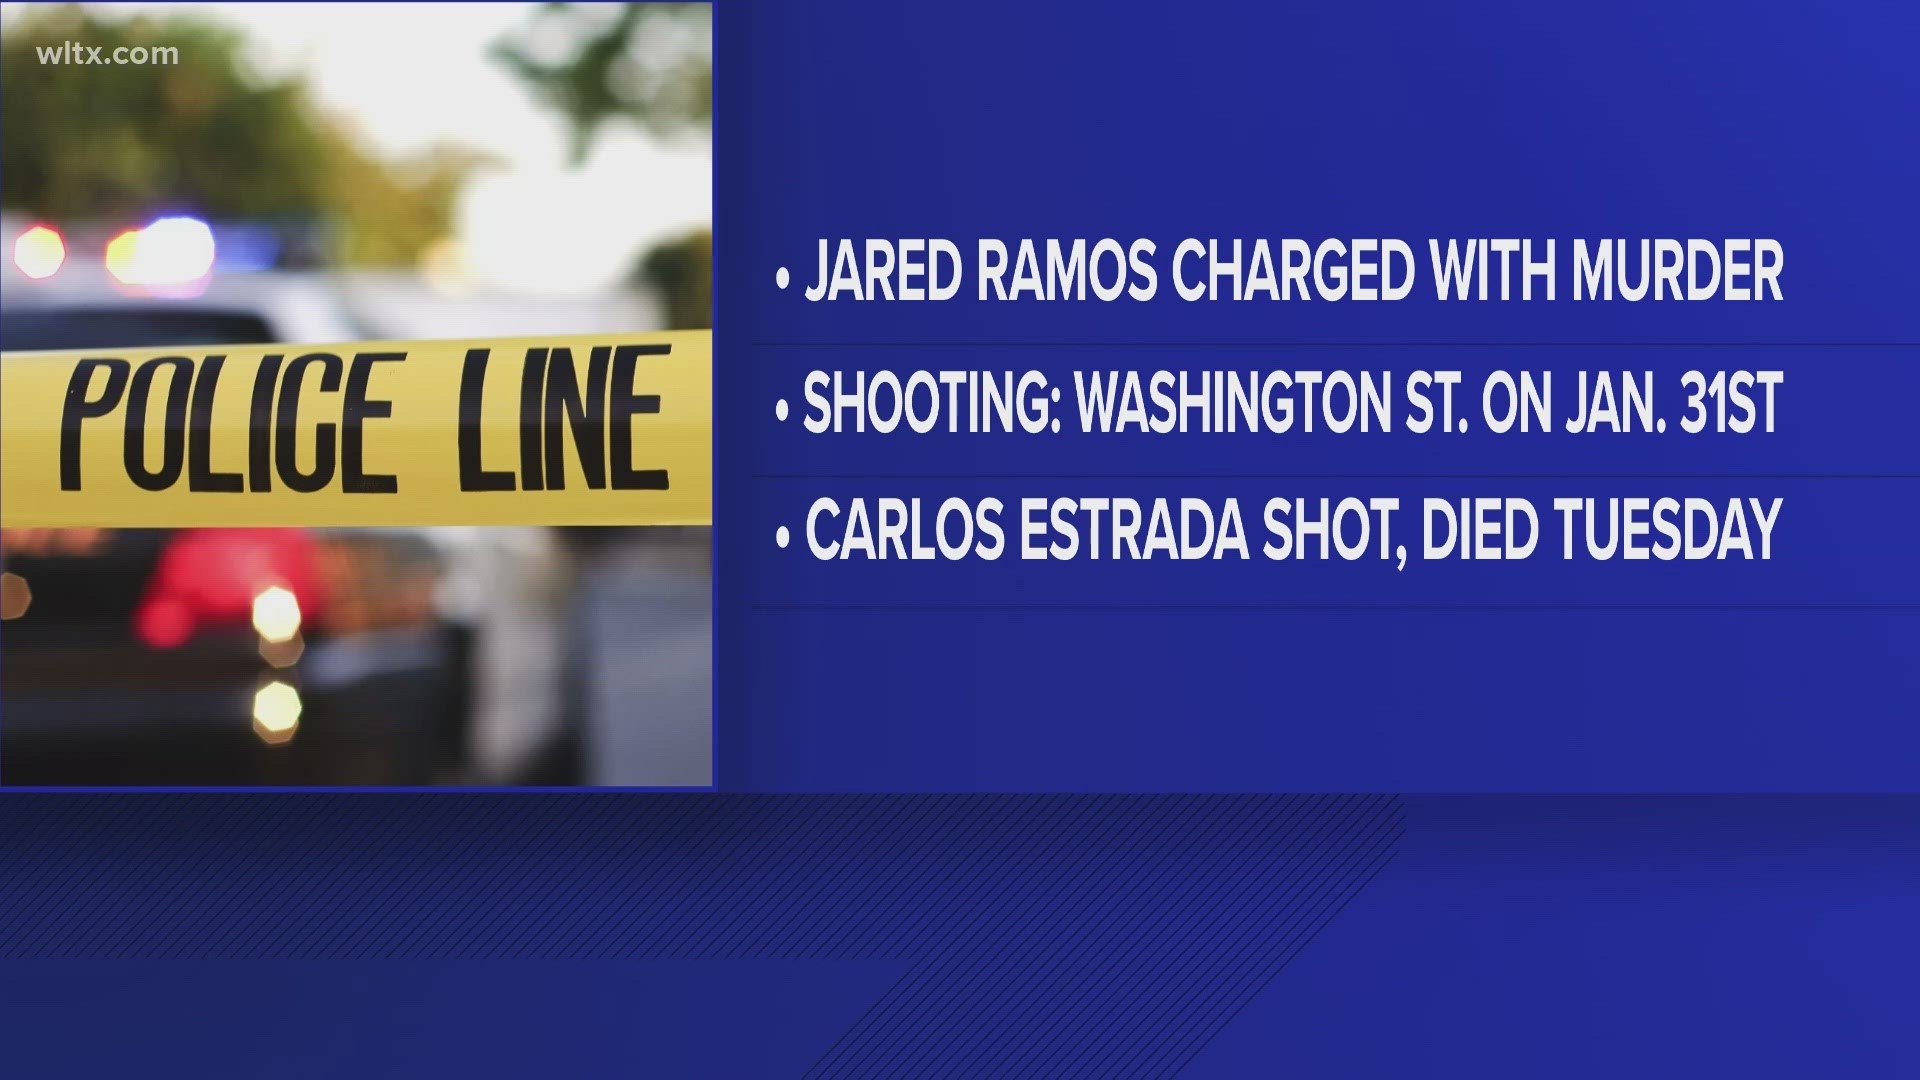 A 19-year-old has been arrested and charged in the murder of a man who was shot on Washington Street a week earlier.